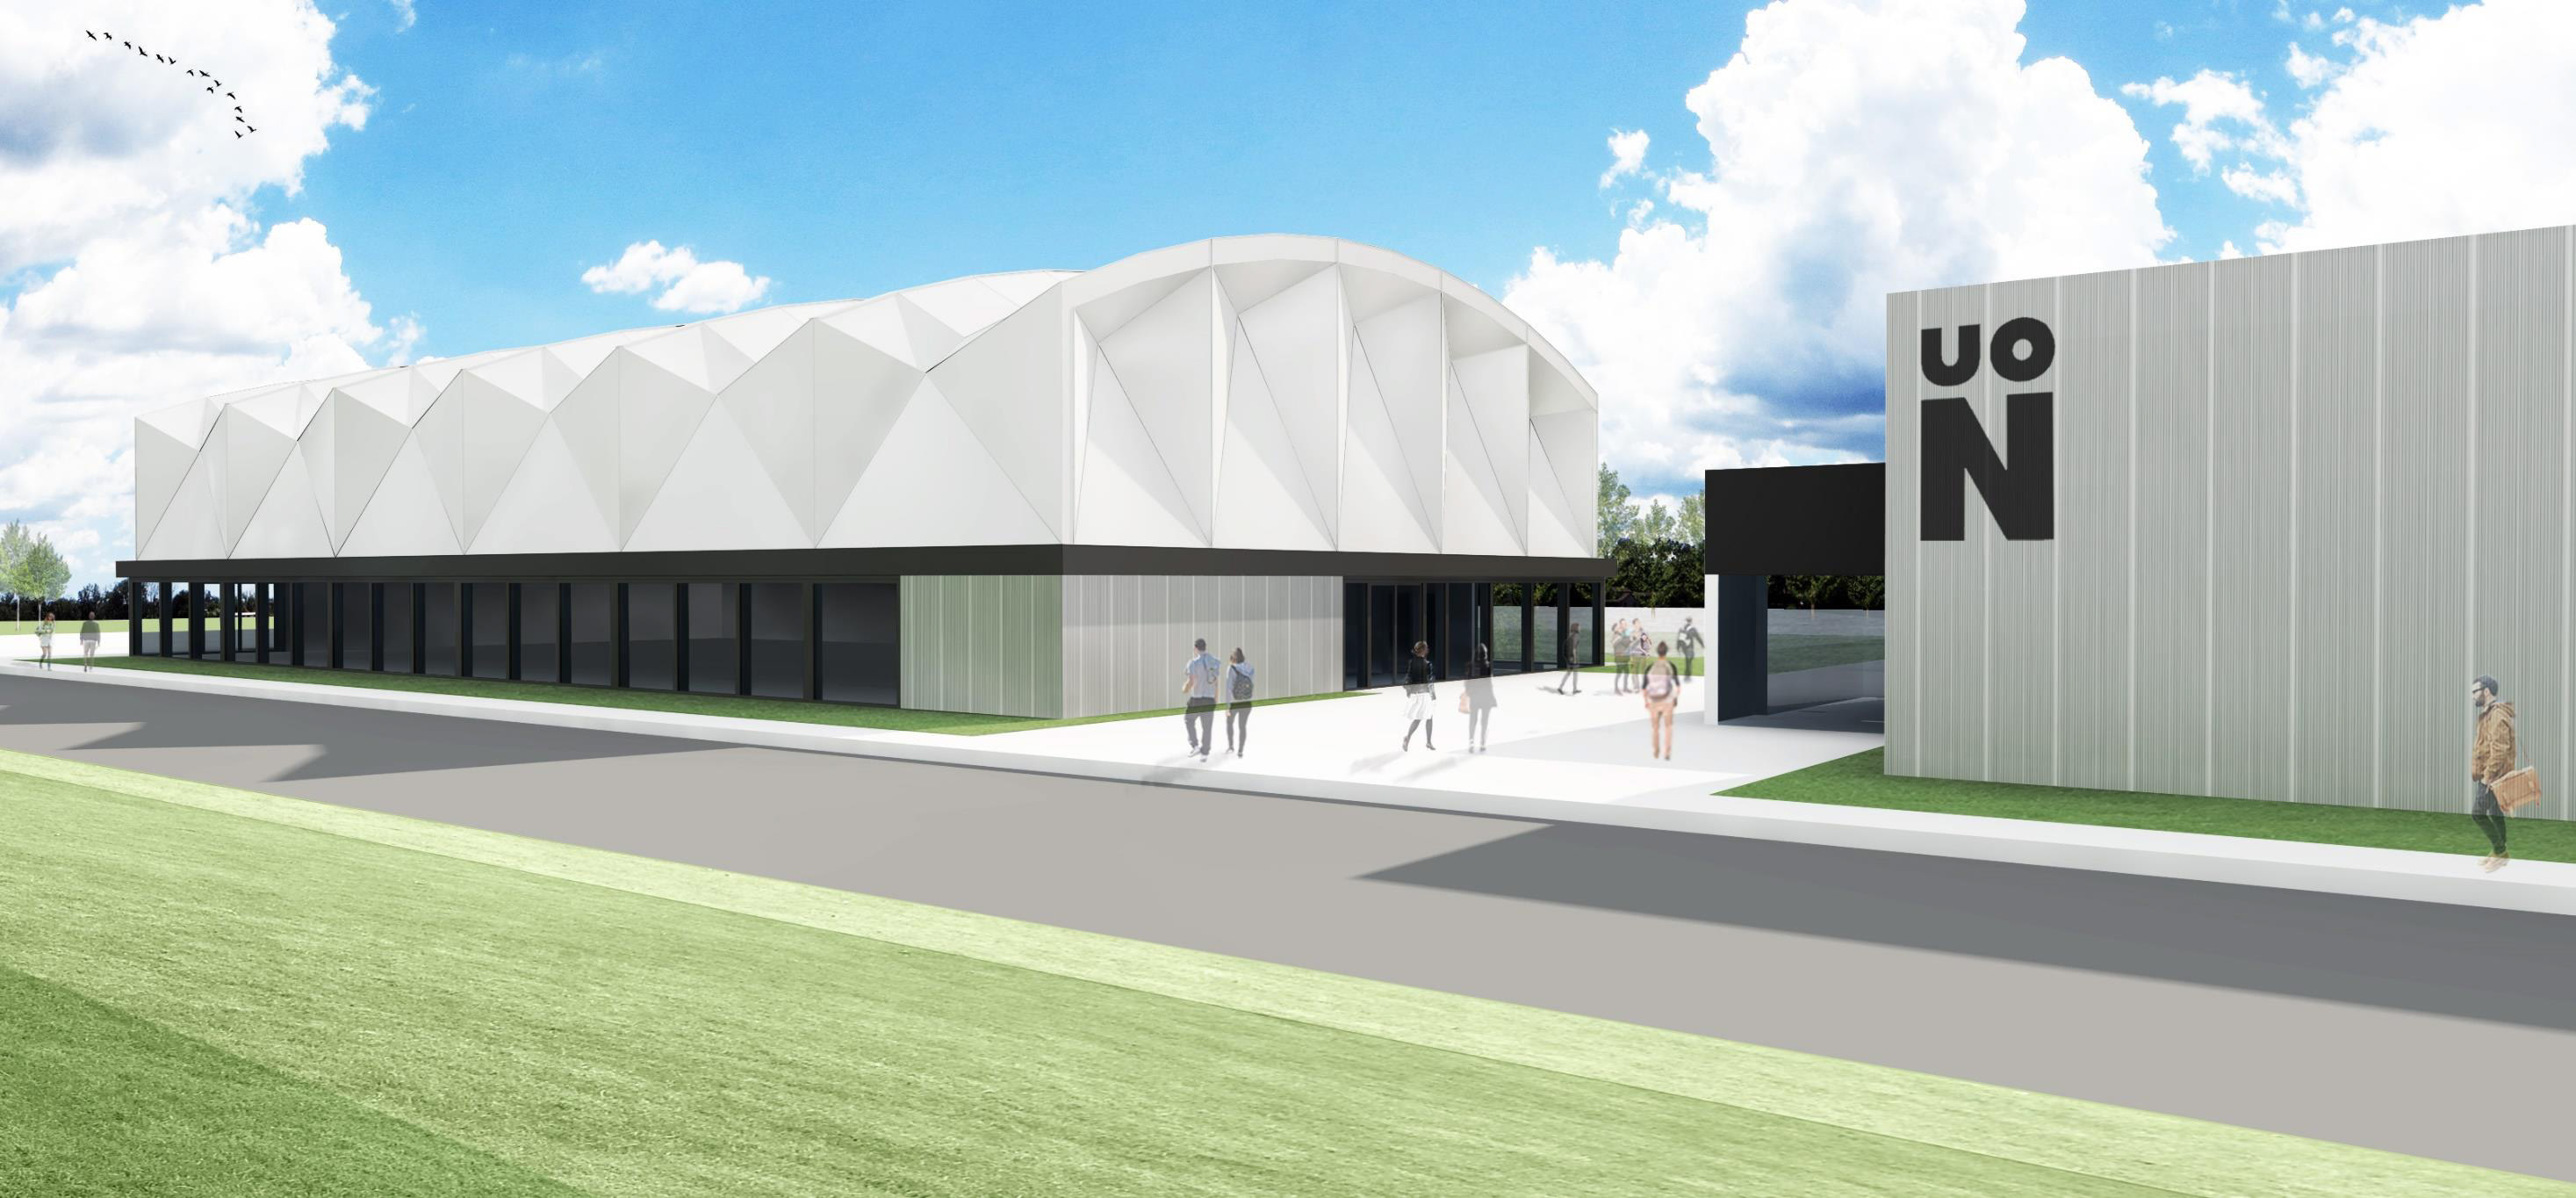 Great news for sporting students as University’s dome plans are approved